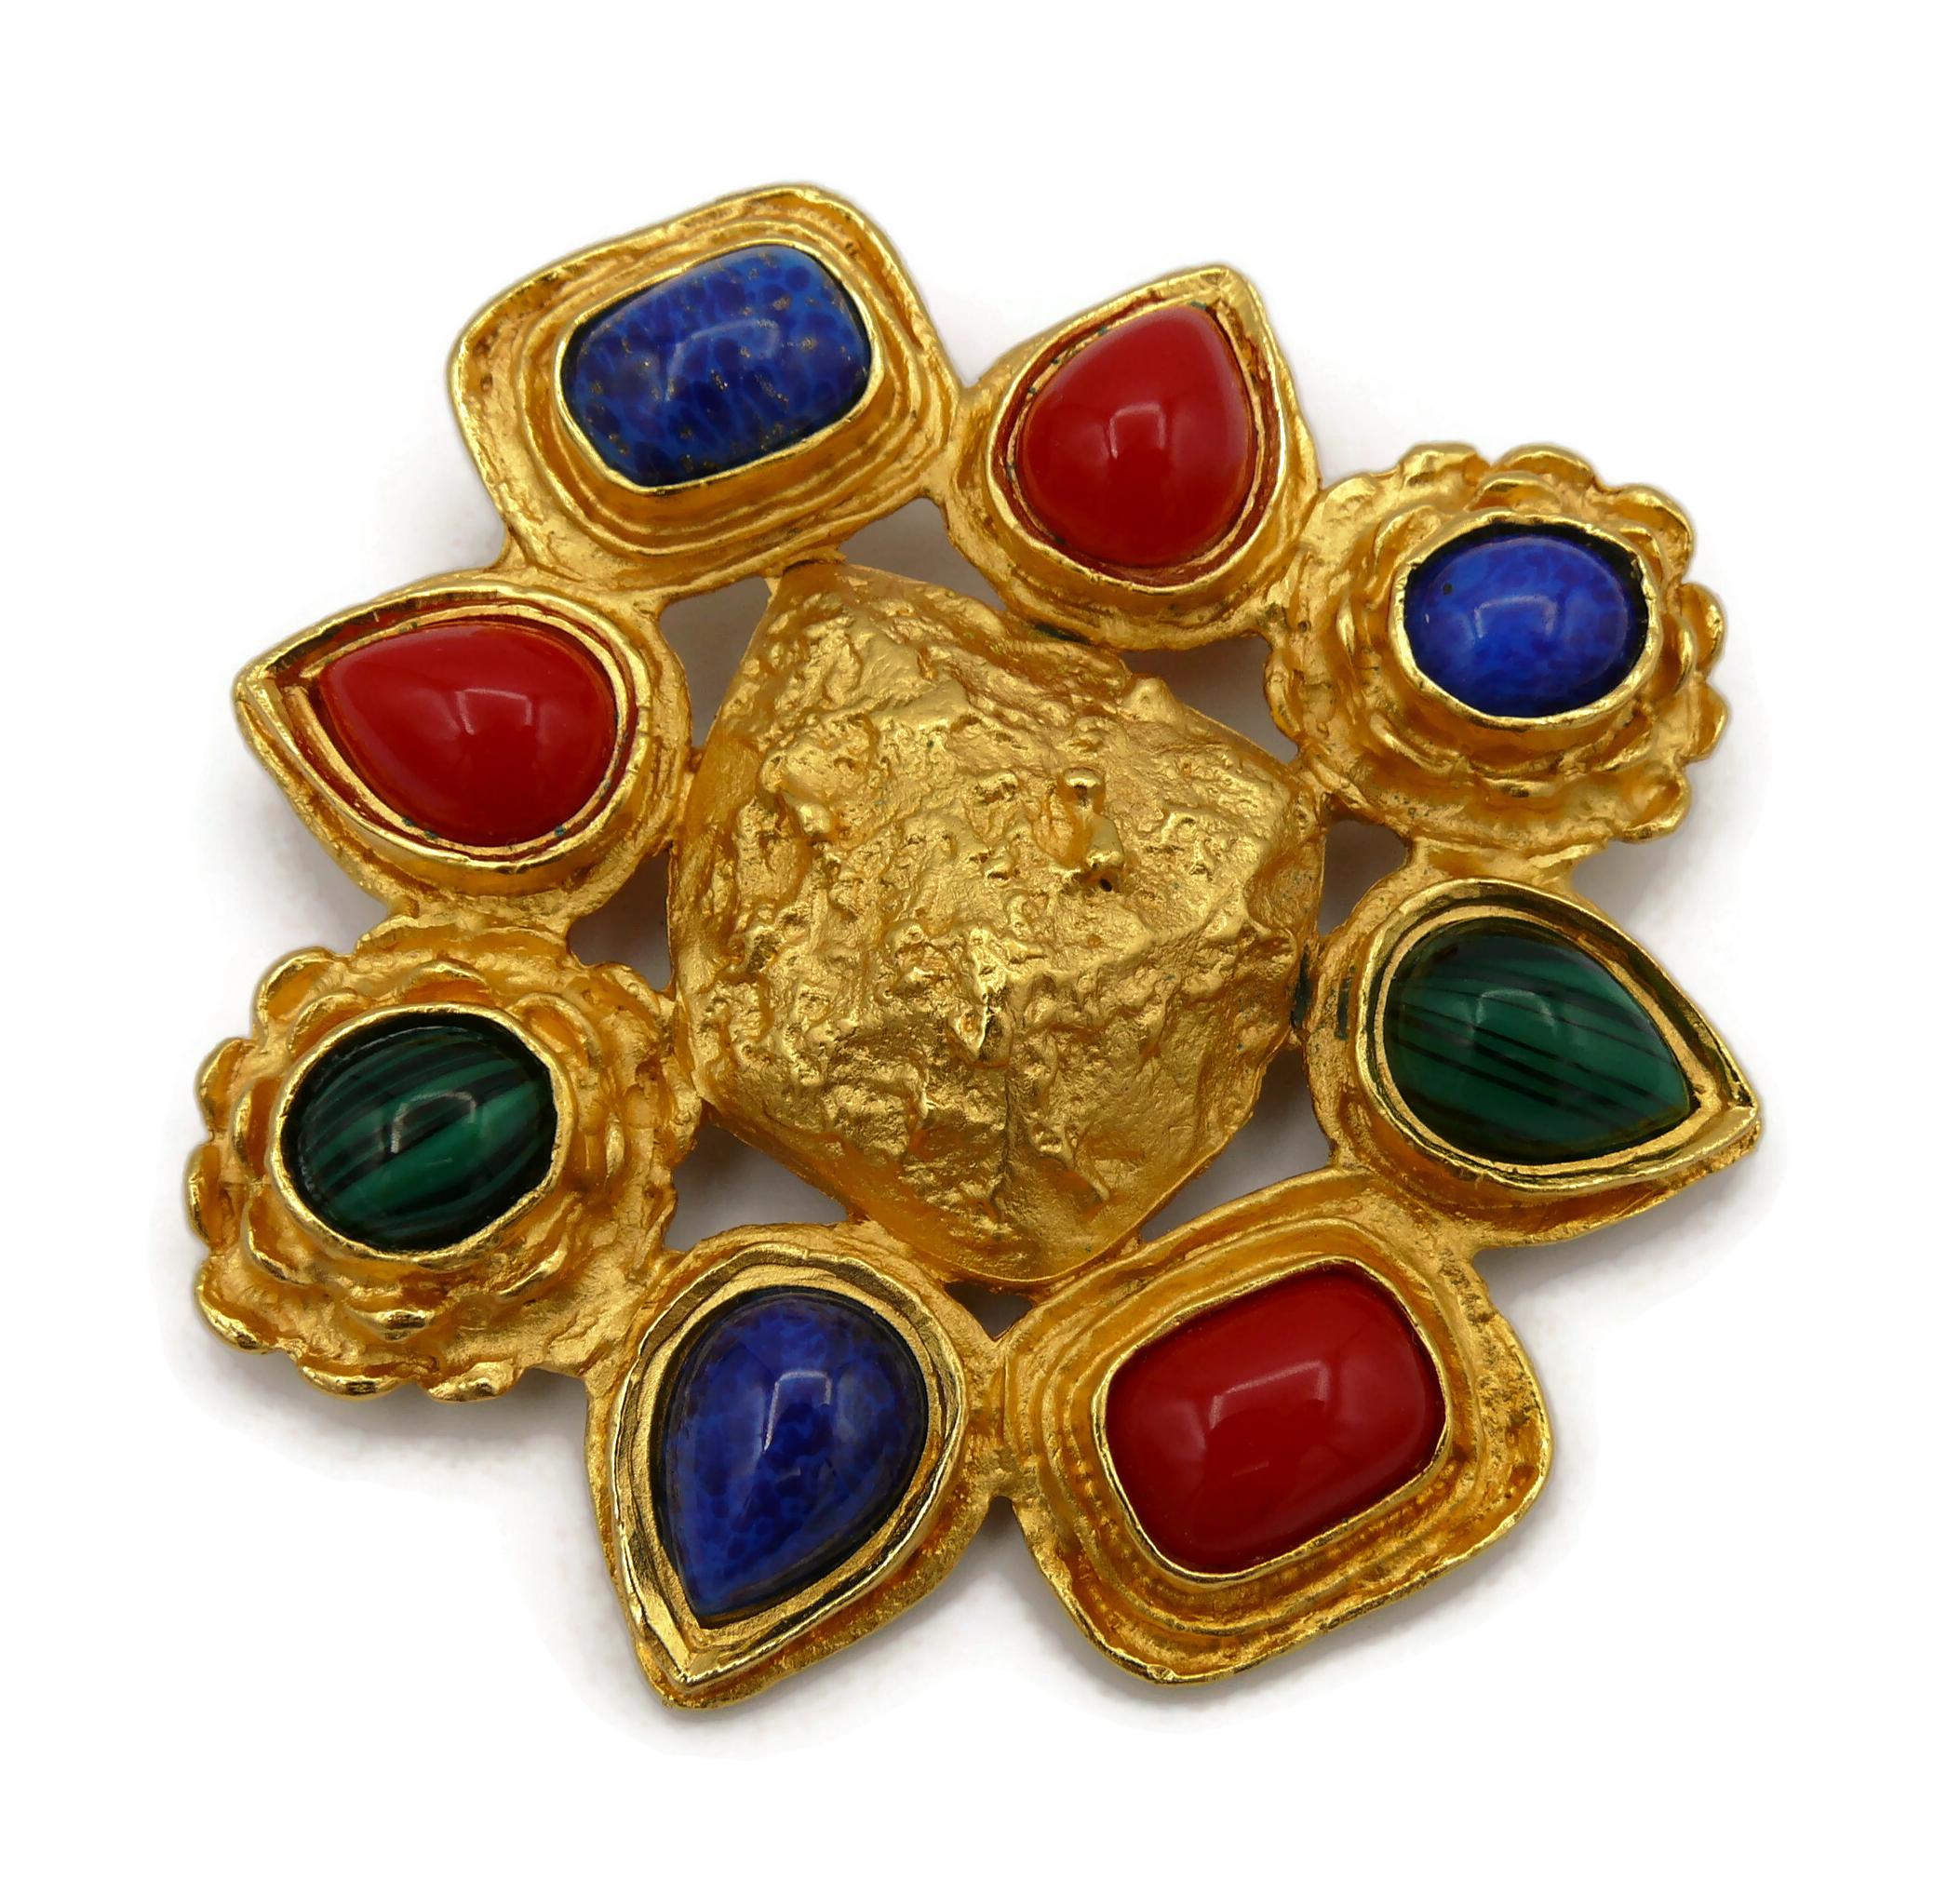 CHRISTIAN LACROIX Vintage Massive Gold Tone and Faux Gemstones Brooch For Sale 3